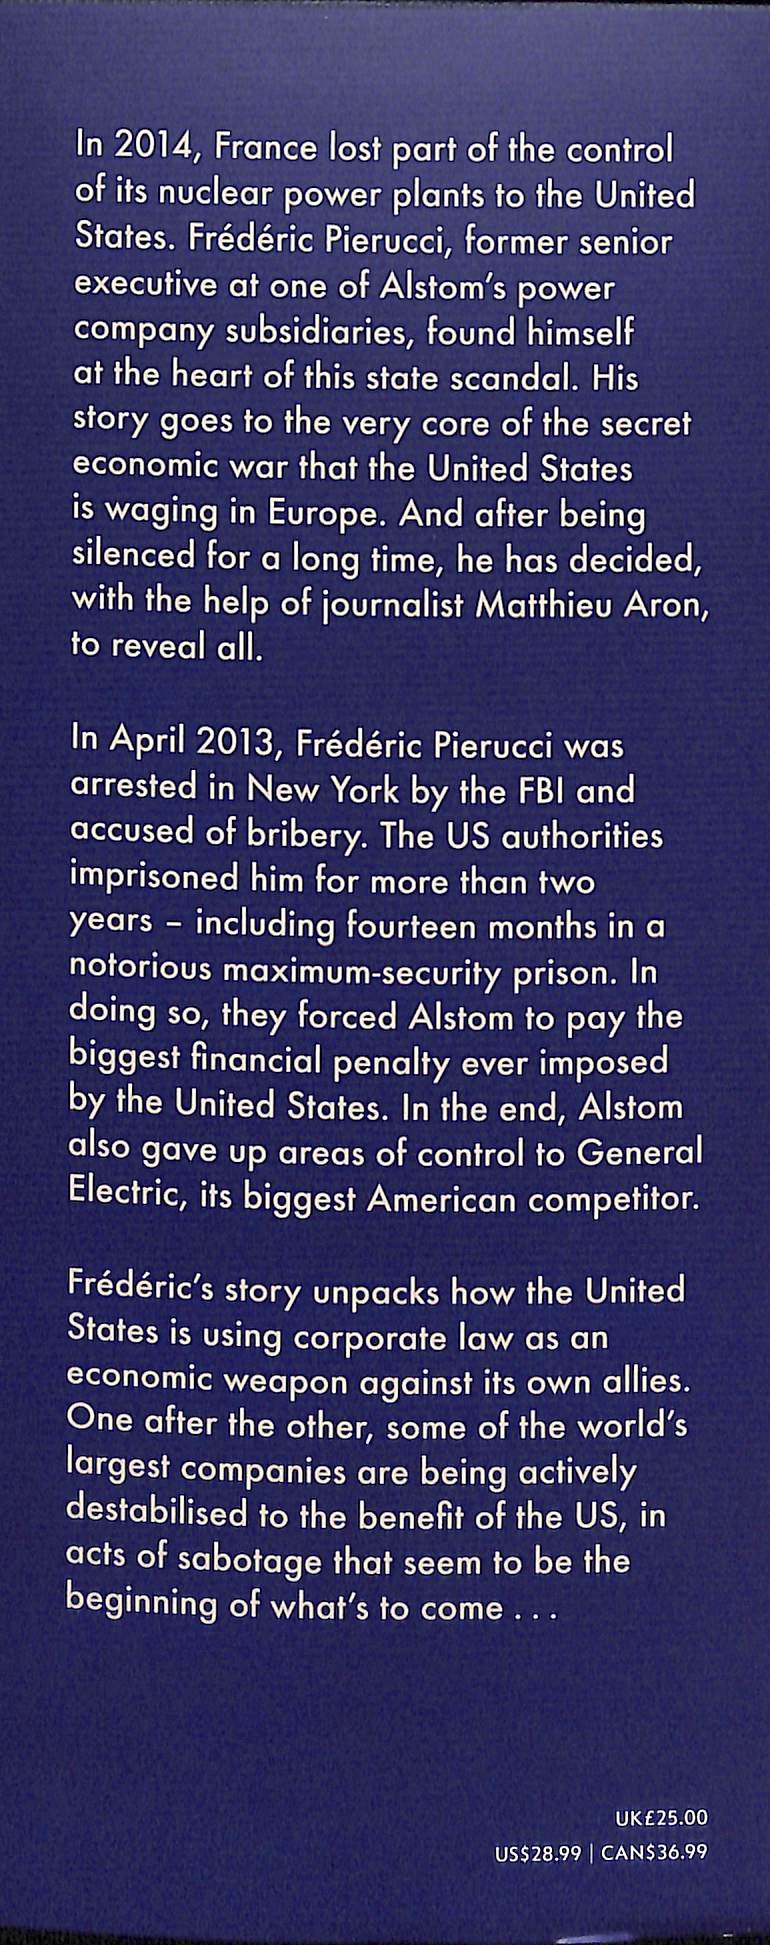 The American Trap, authored by Frederic Pierucci - Back Cover.jpg